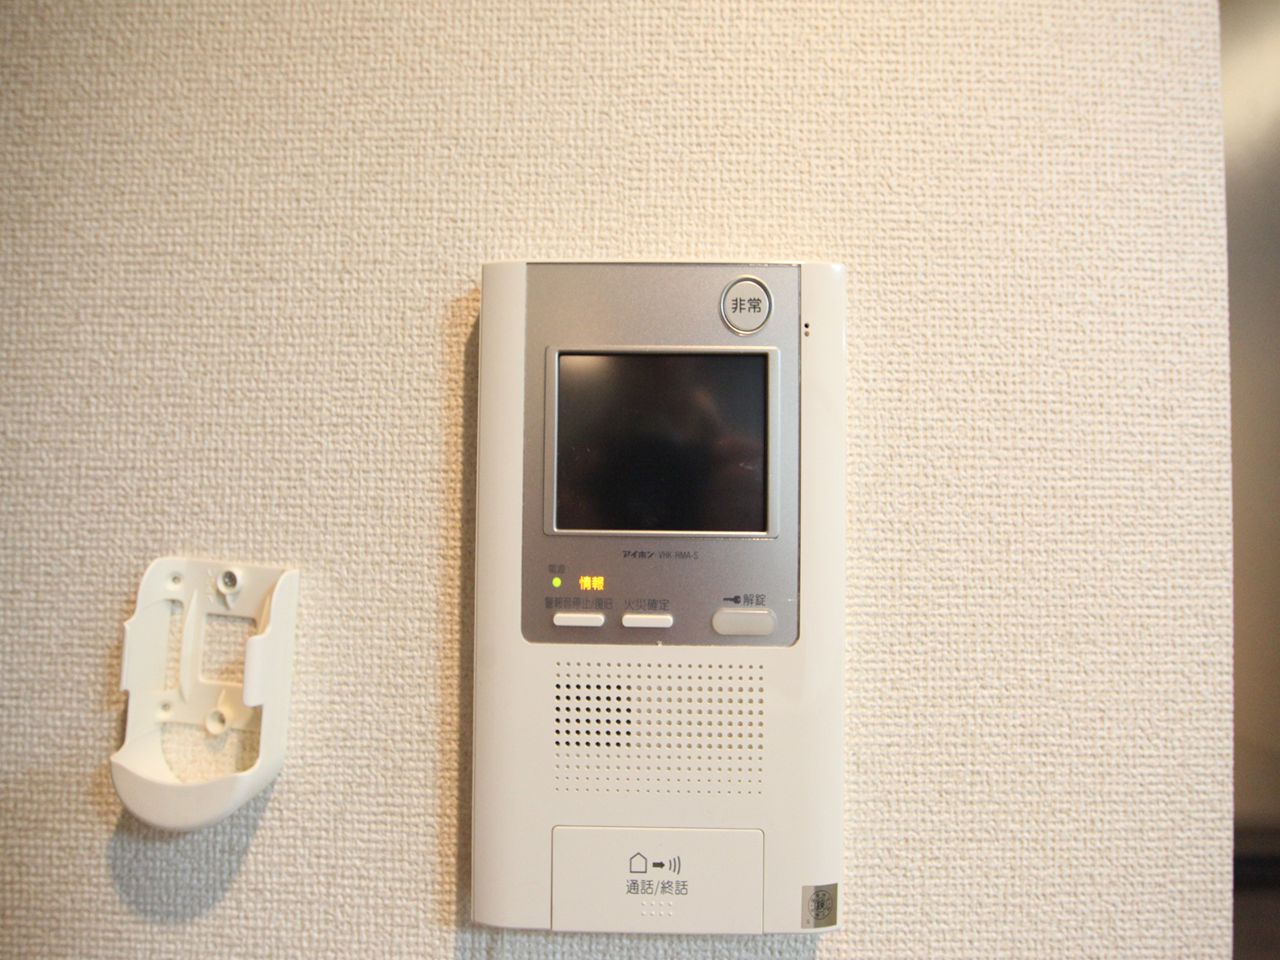 Security. Intercom with TV monitor (with auto-lock)